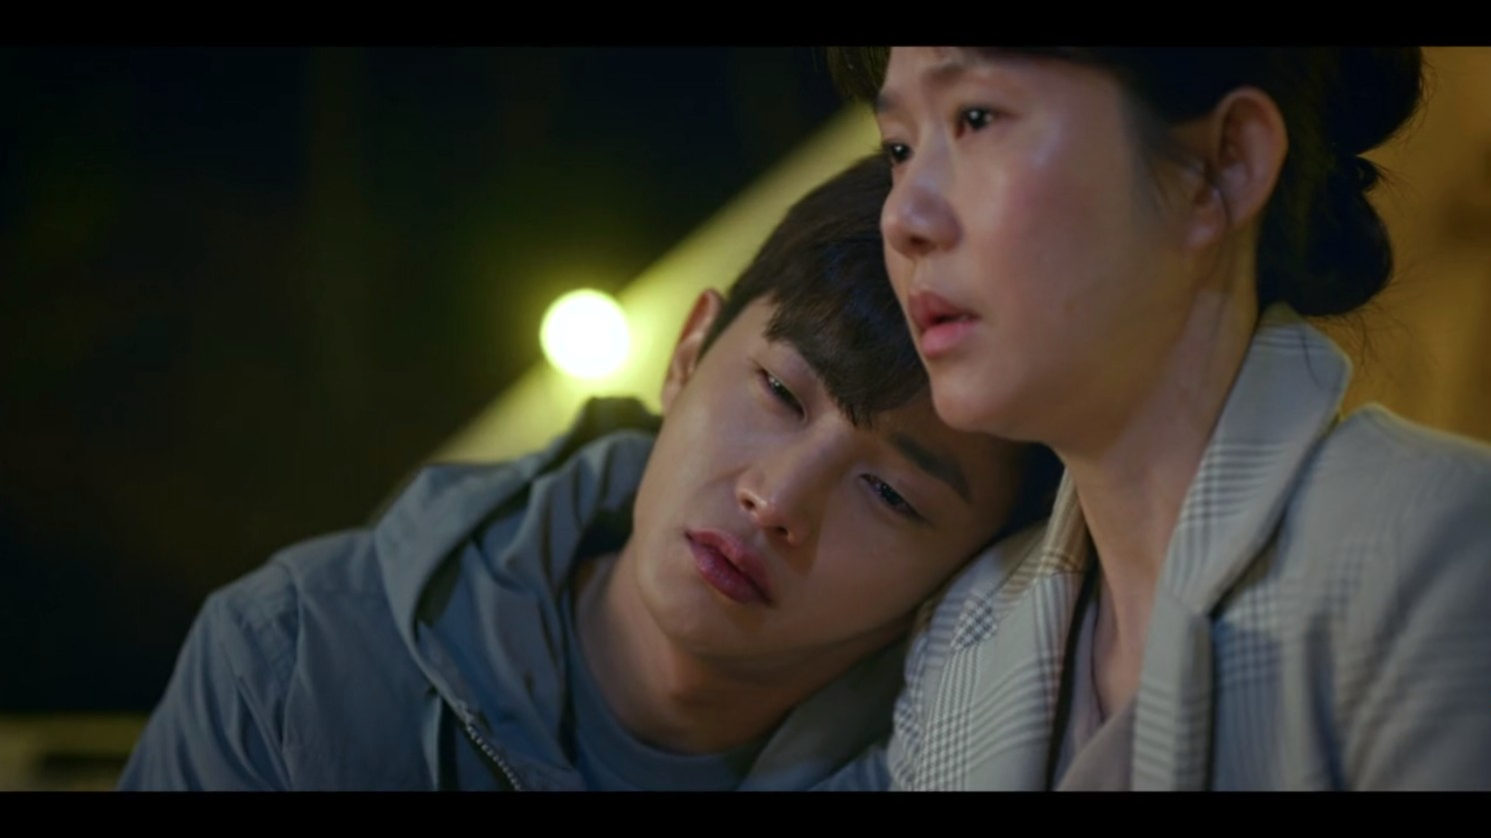 Delivery Man: Episodes 7-8